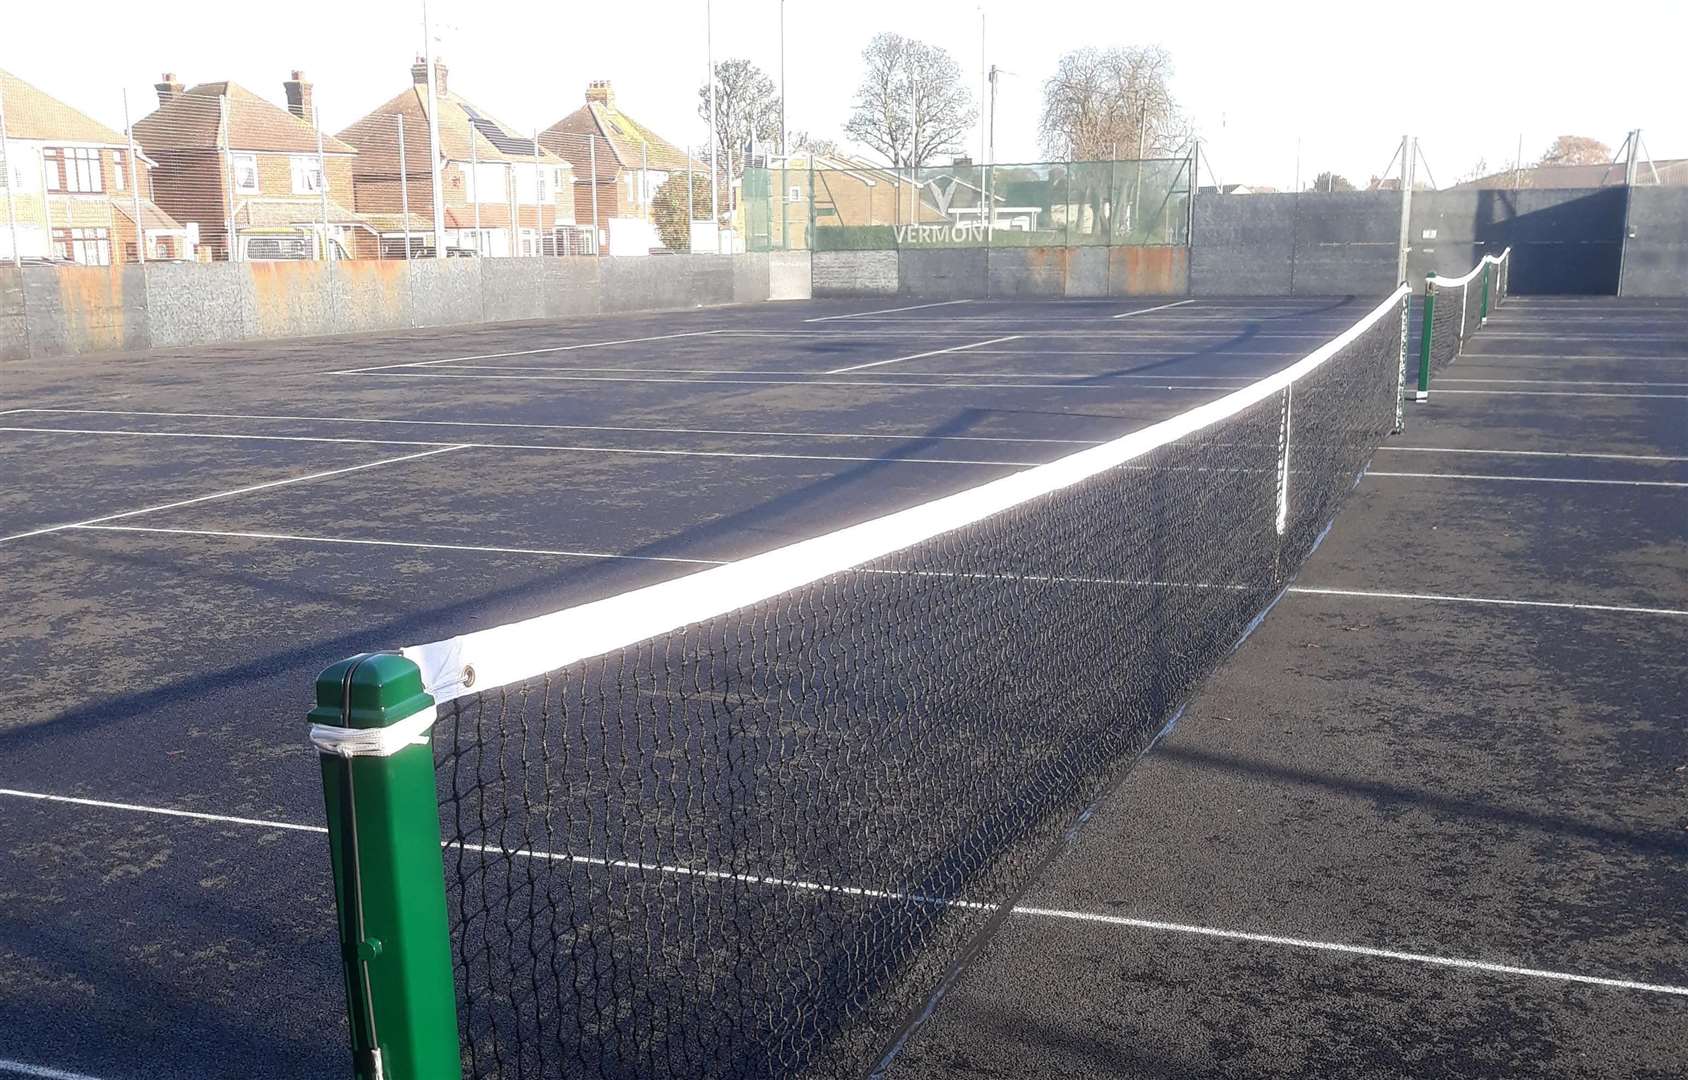 Milton Recreation Ground’s revamped tennis courts in Sittingbourne. Picture: Swale council